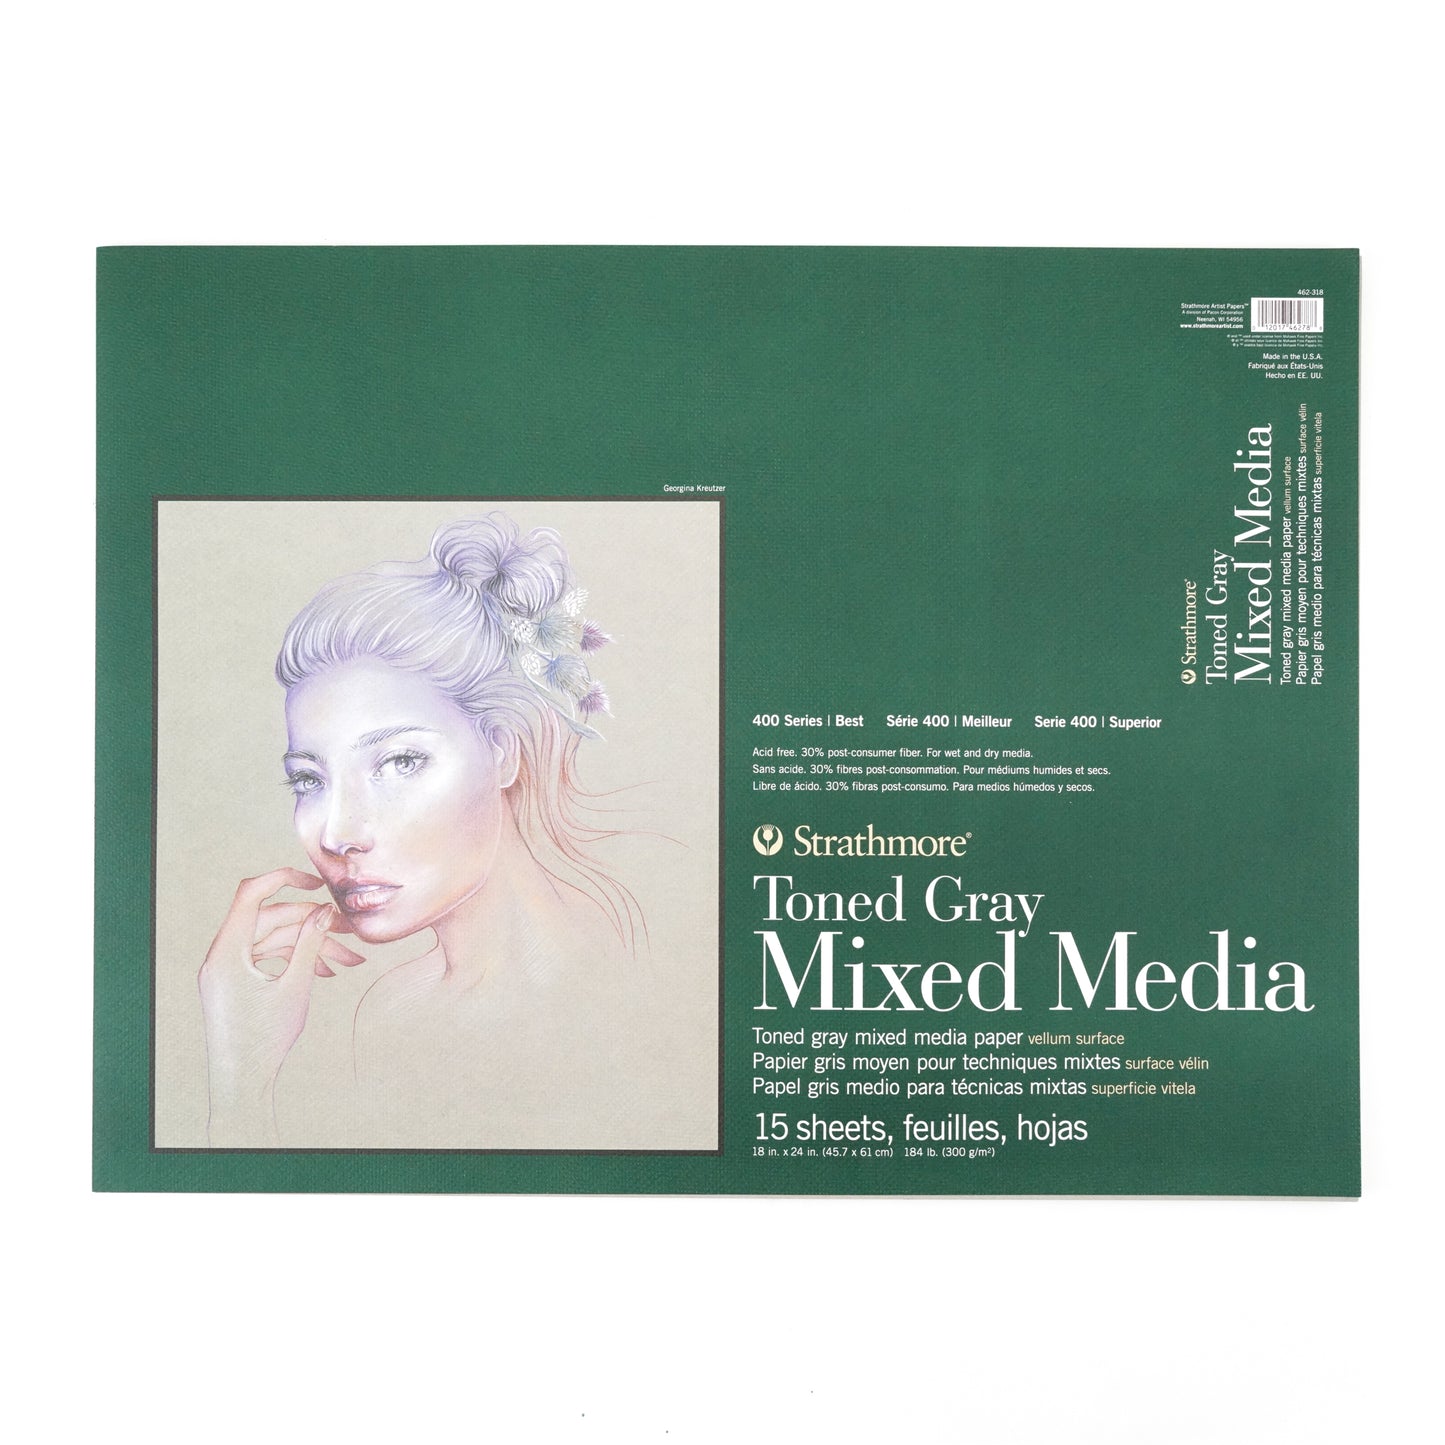 NEW 3x9 Mixed Media Pads - Strathmore Artist Papers